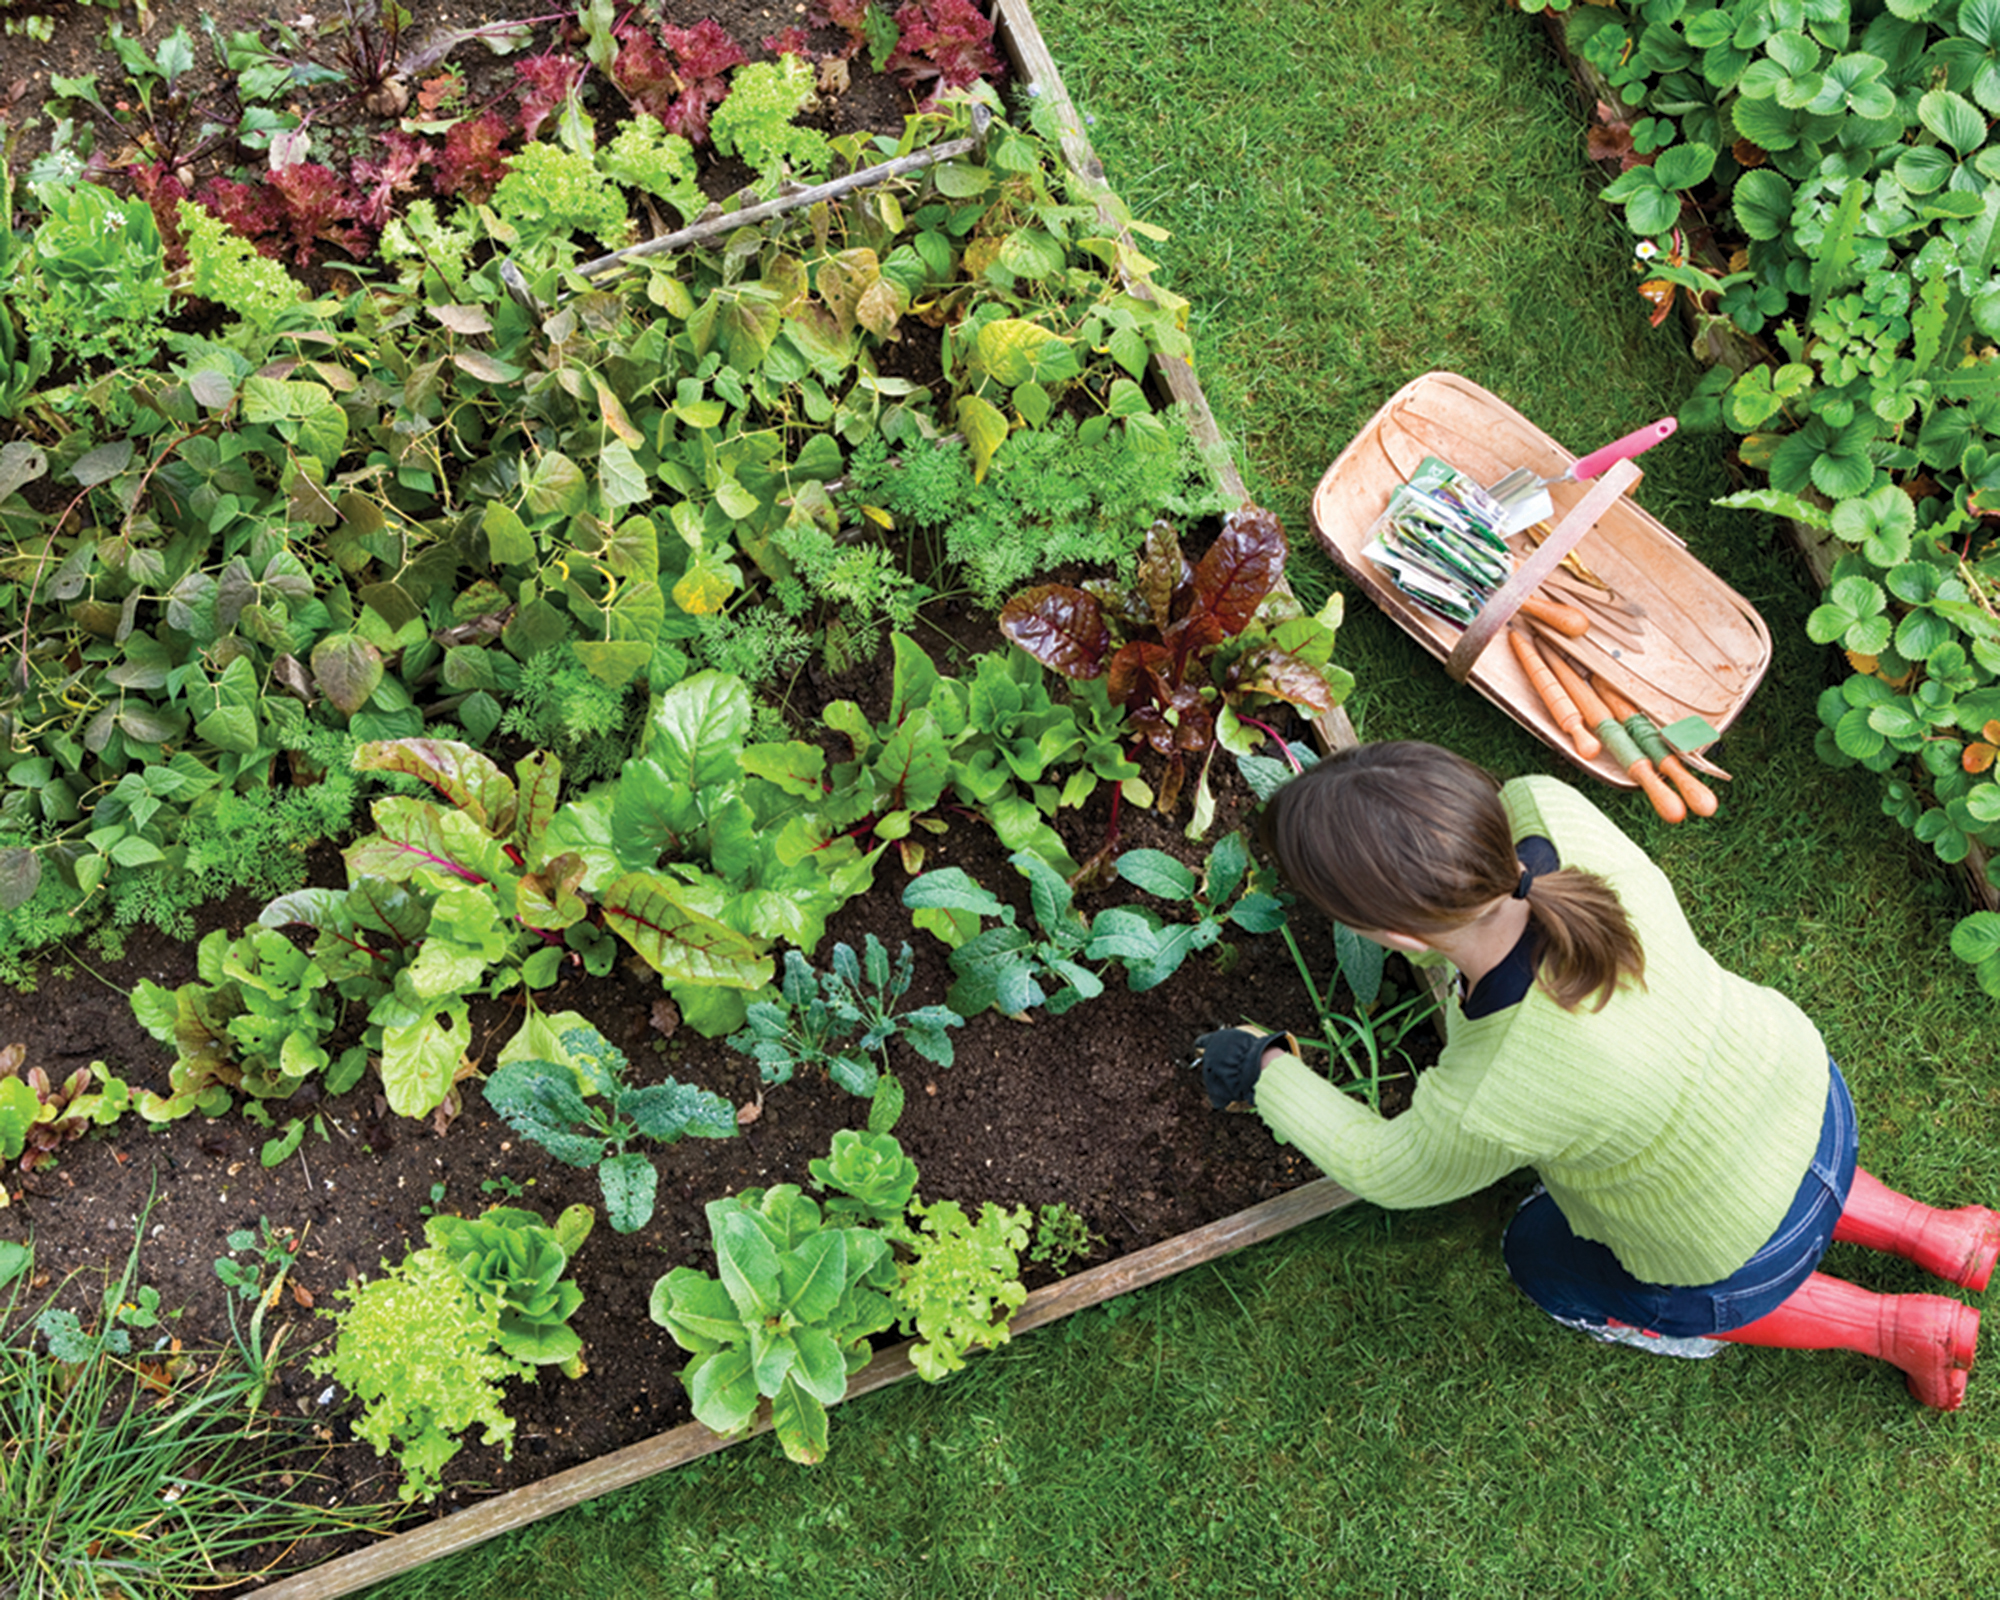 Woman gardening at raised bed filled with vegetables